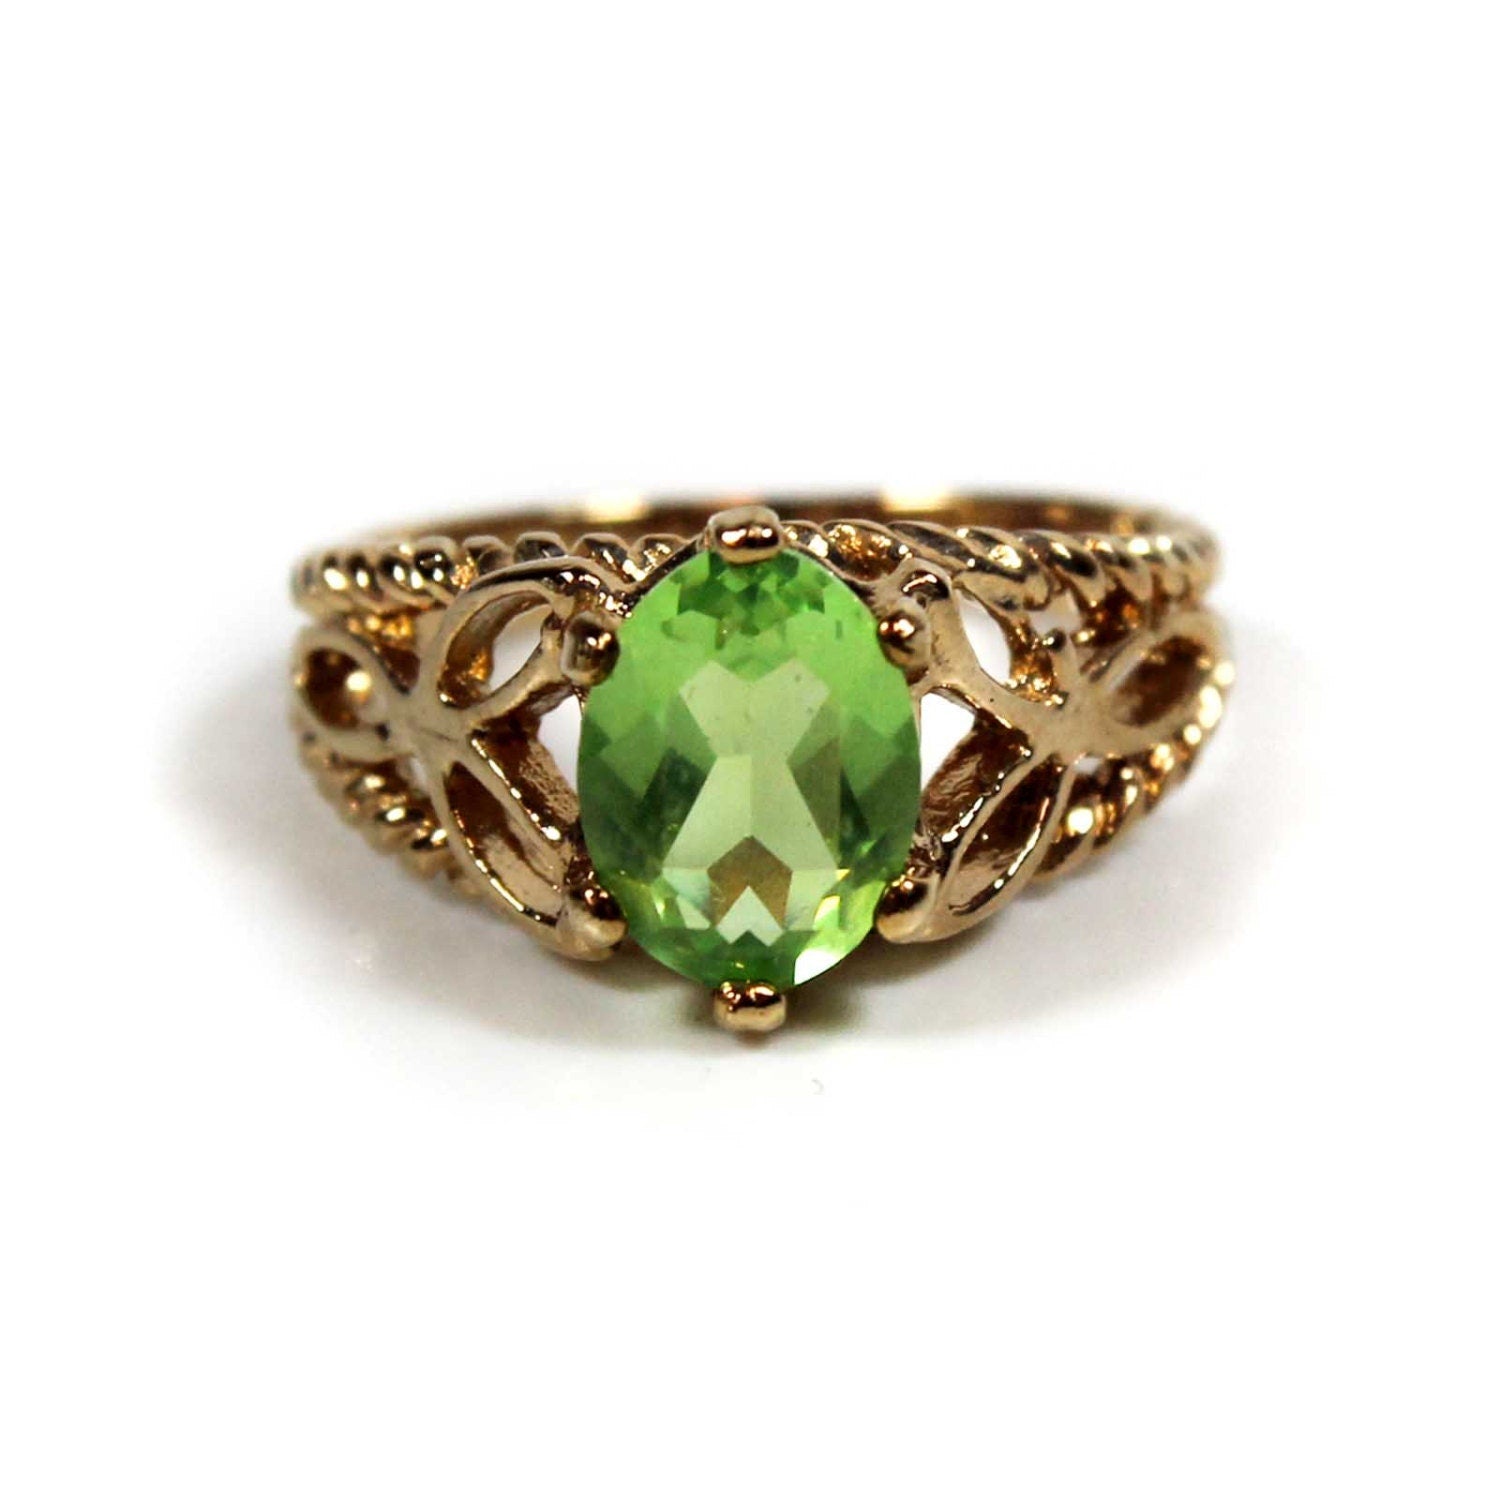 Vintage Ring Peridot Swarovski Crystal 18k Gold Filigree Cocktail Ring Antique Womans Jewelry #R300 - Limited Stock - Never Worn